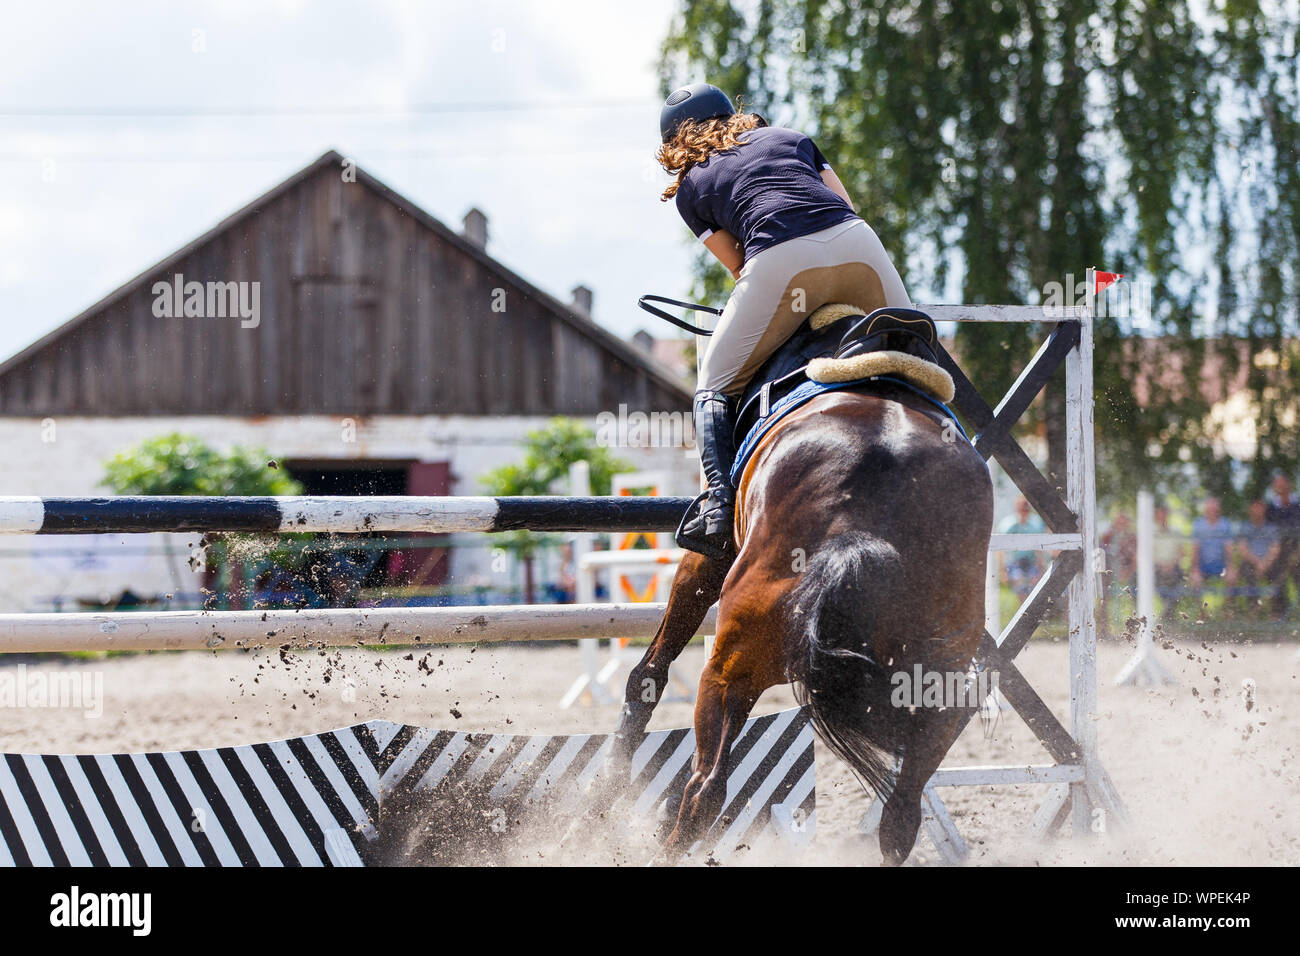 Disobedience of the horse on show jumping equestrian competition Stock Photo